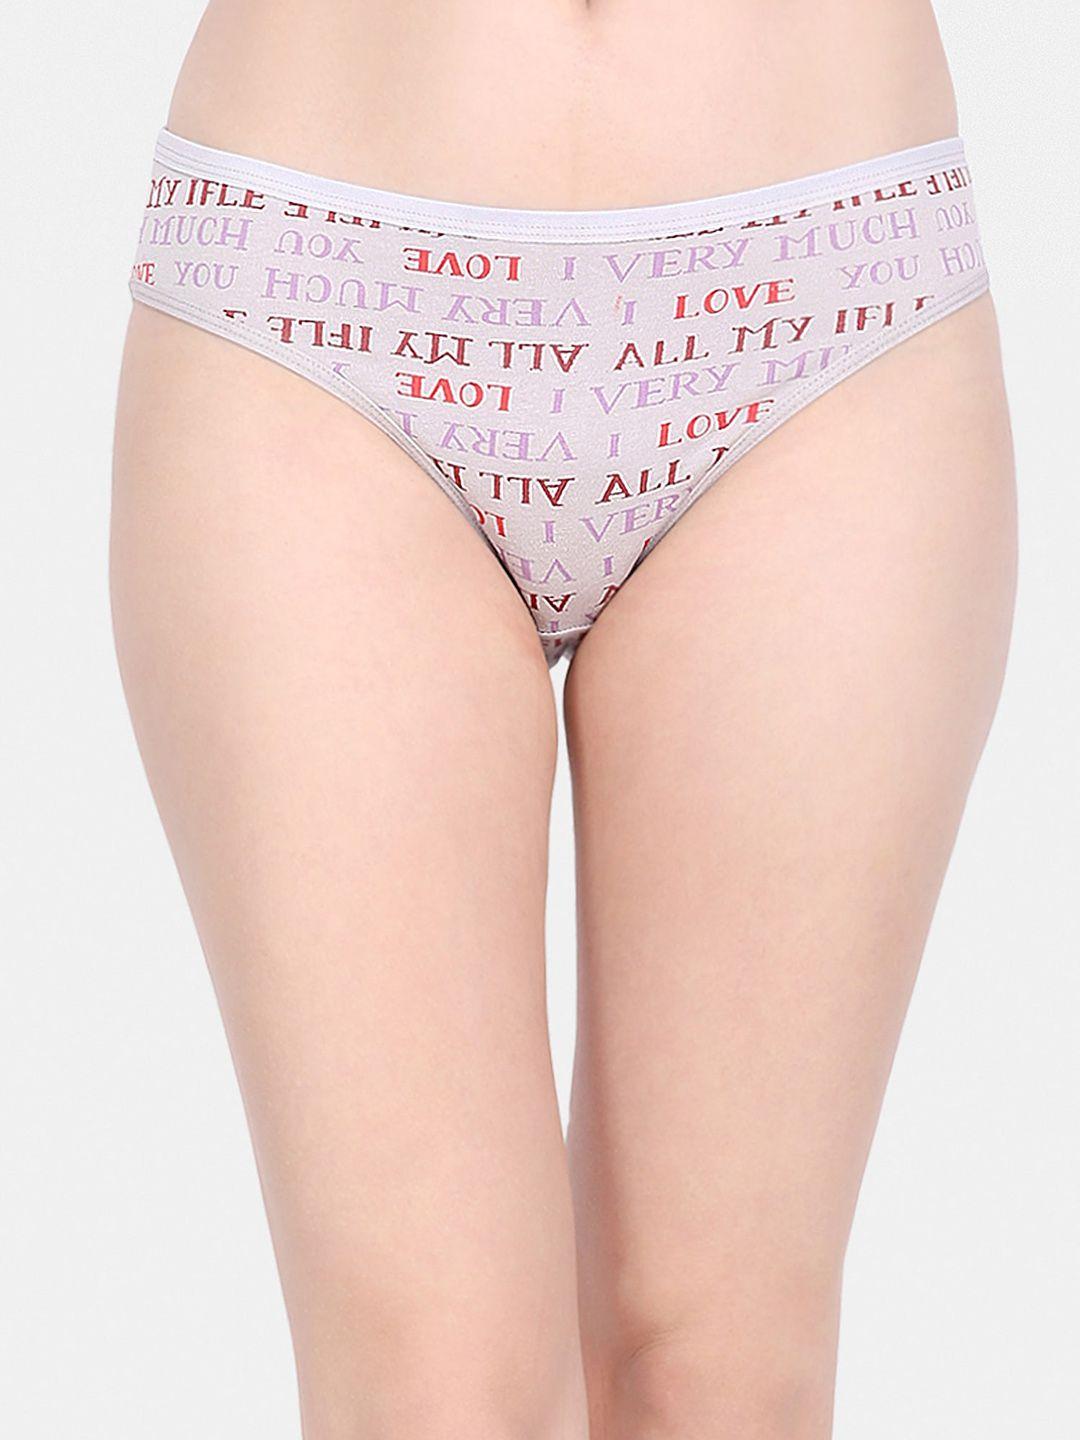 ms.lingies-women-grey-&-red-typography-printed-hipster-briefs-z16-89231s